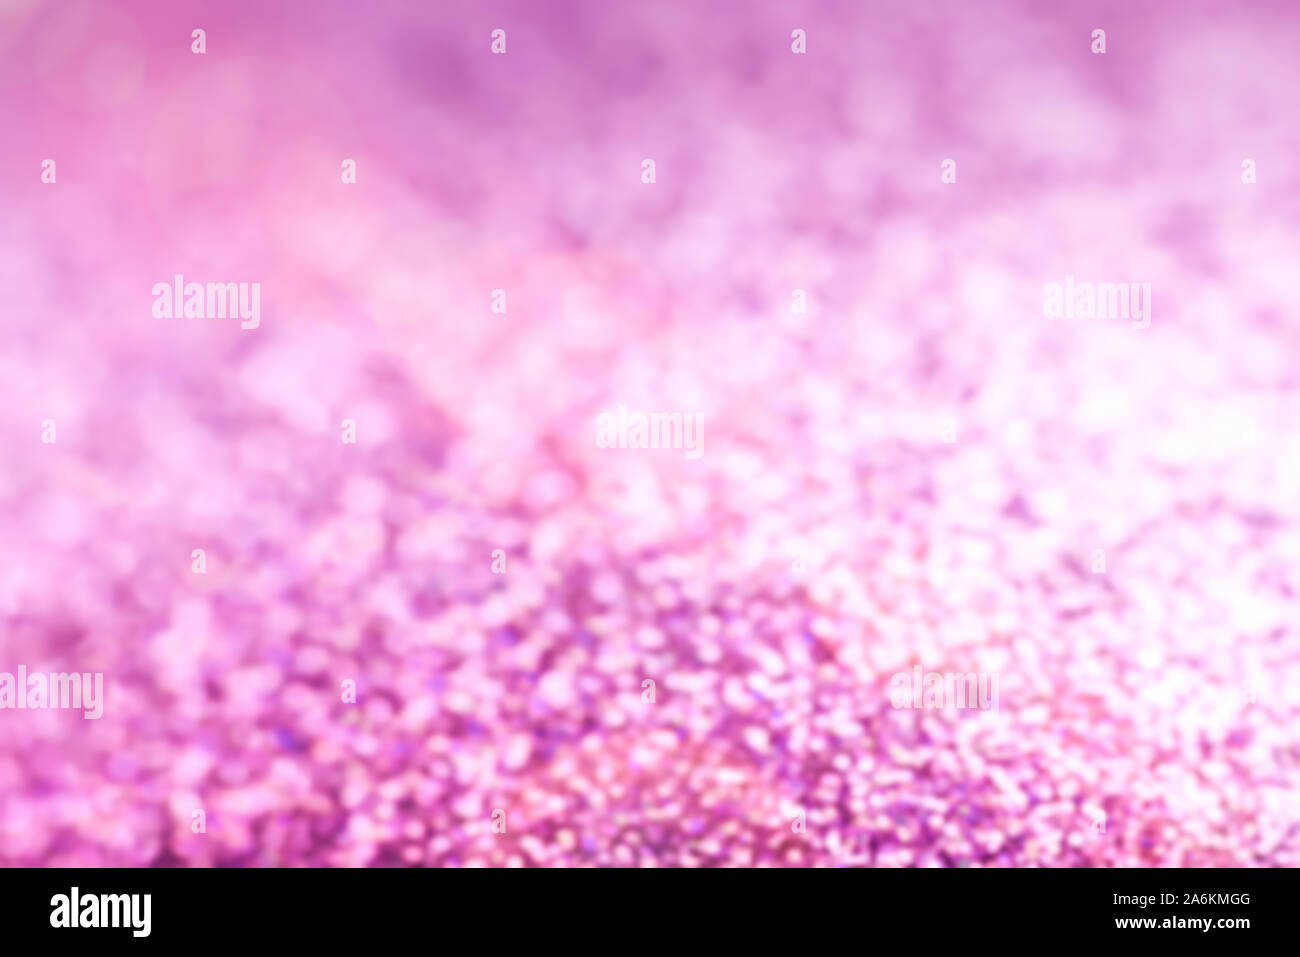 Abstract blurred pink tone glowing Christmas lights background Stock Photo